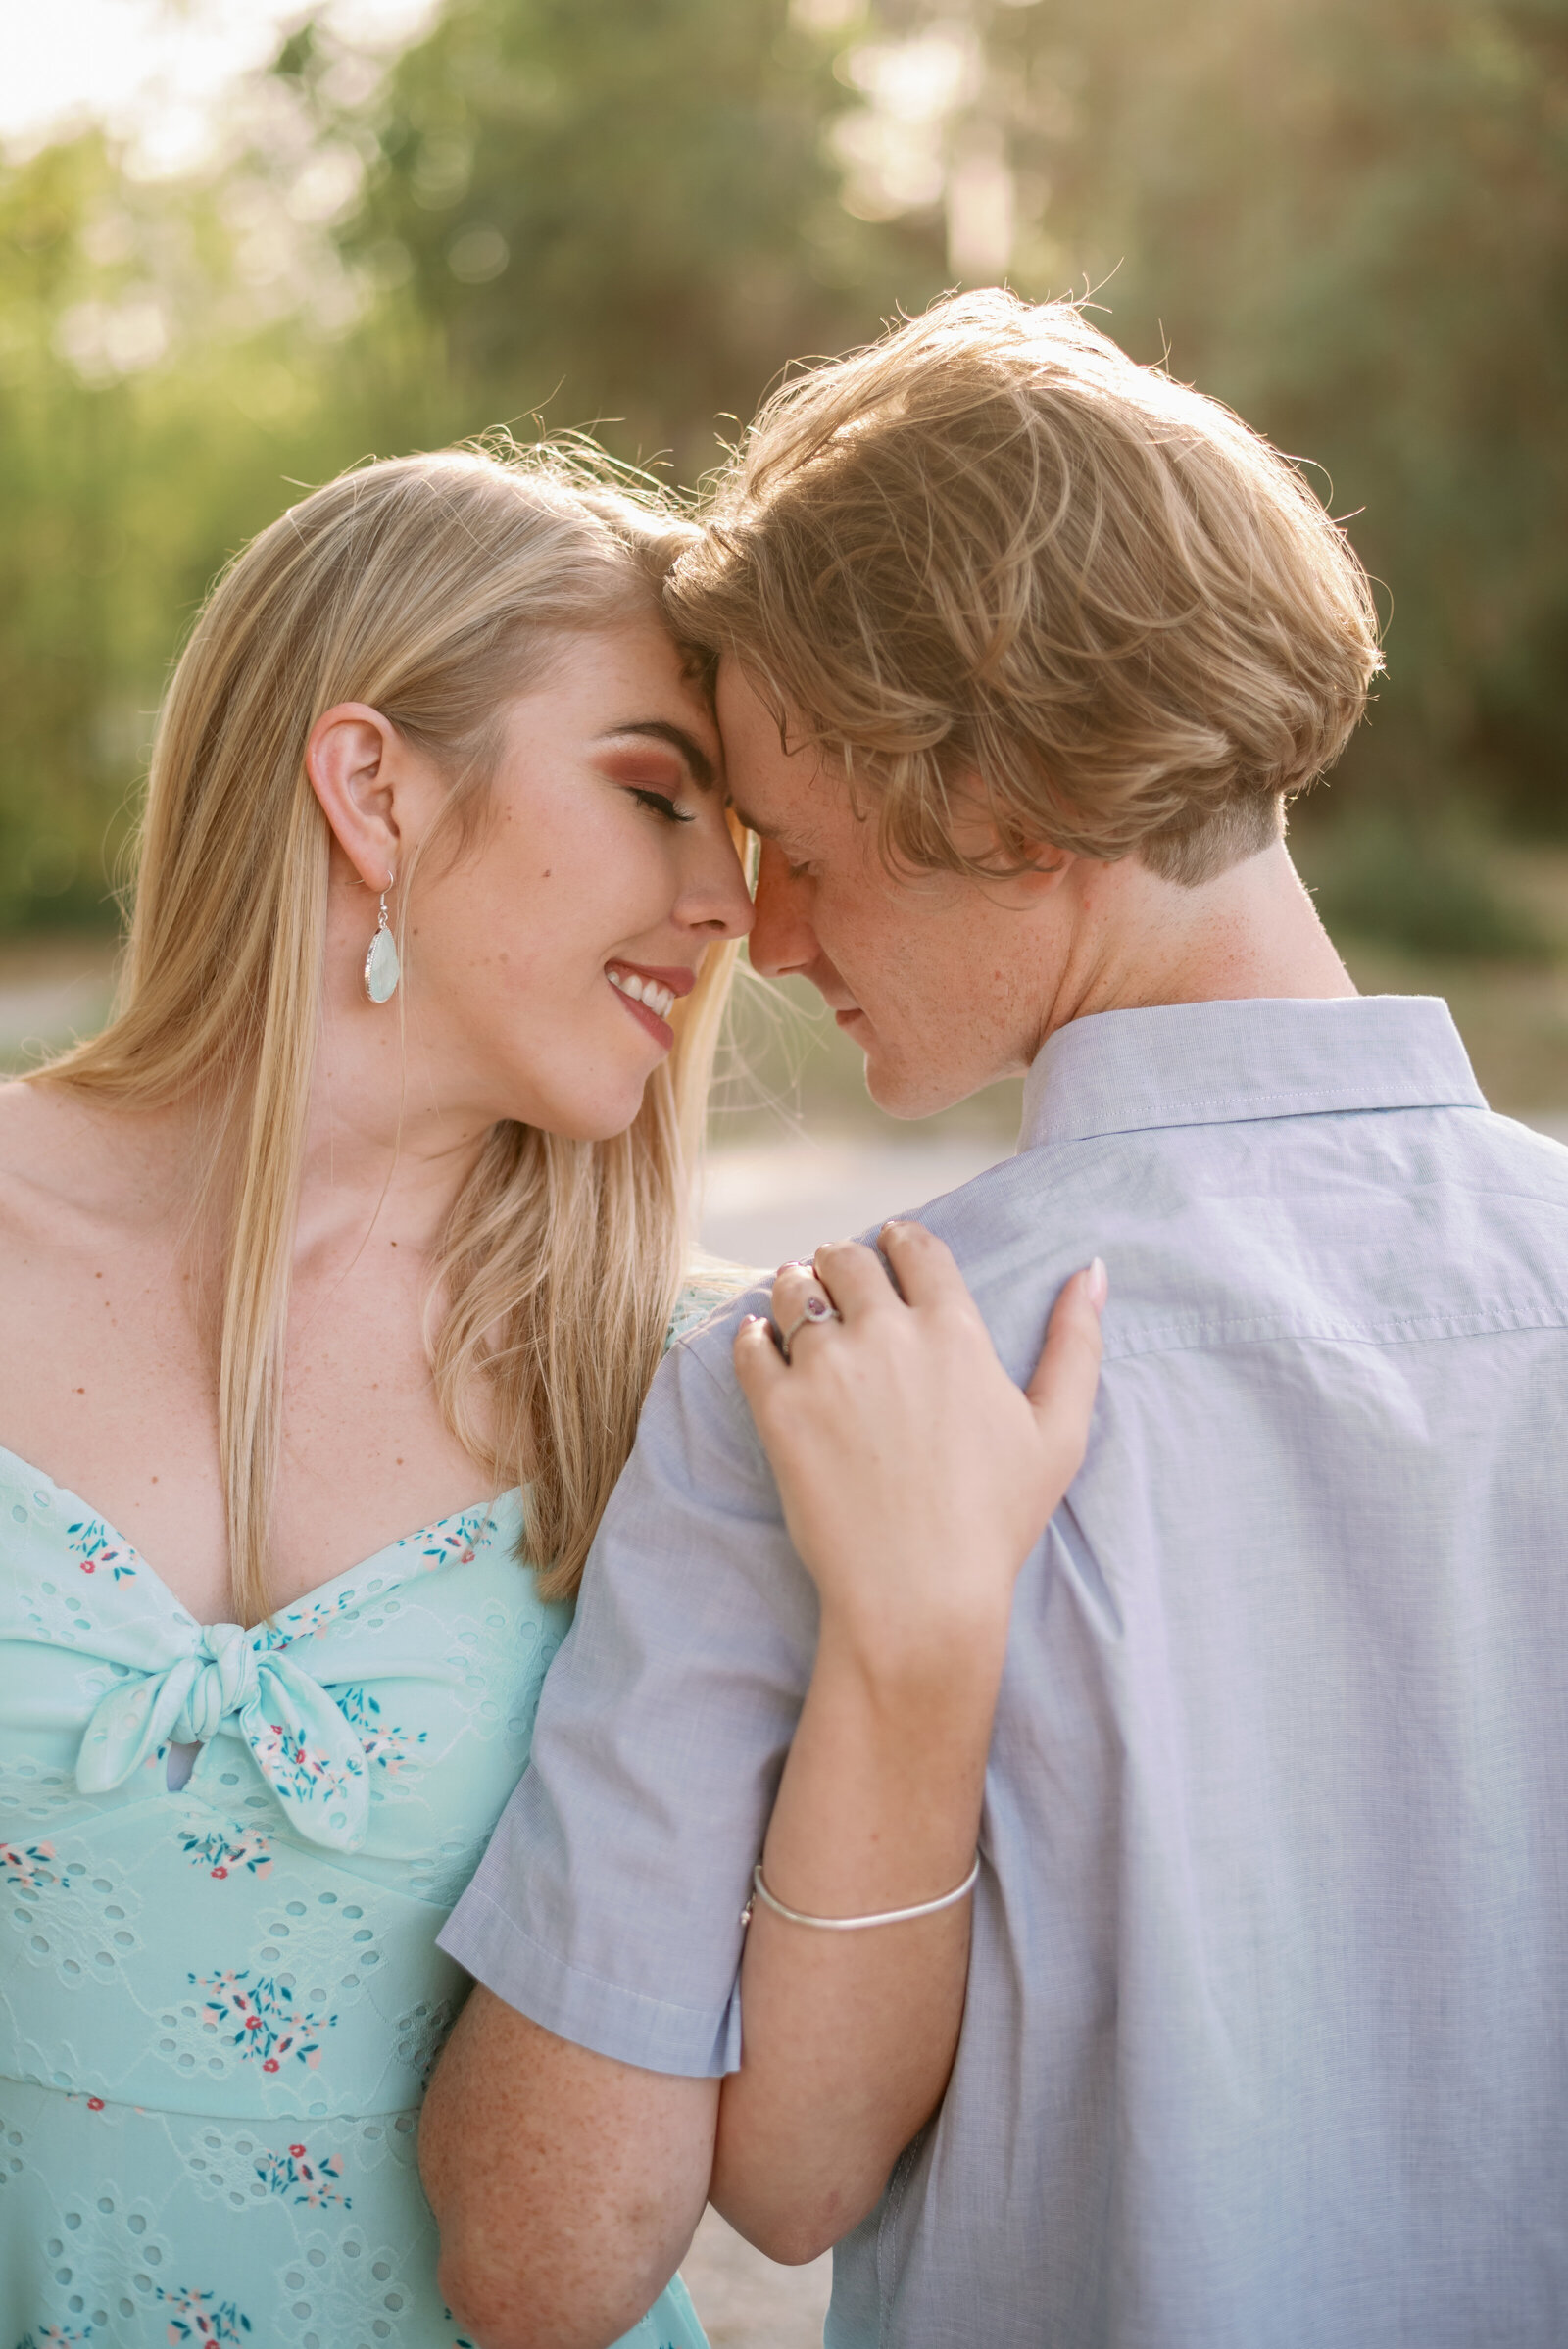 engaged couple touching foreheads together, his back is toward the camera while she is turned toward the camera. Both are smiling with eyes closed